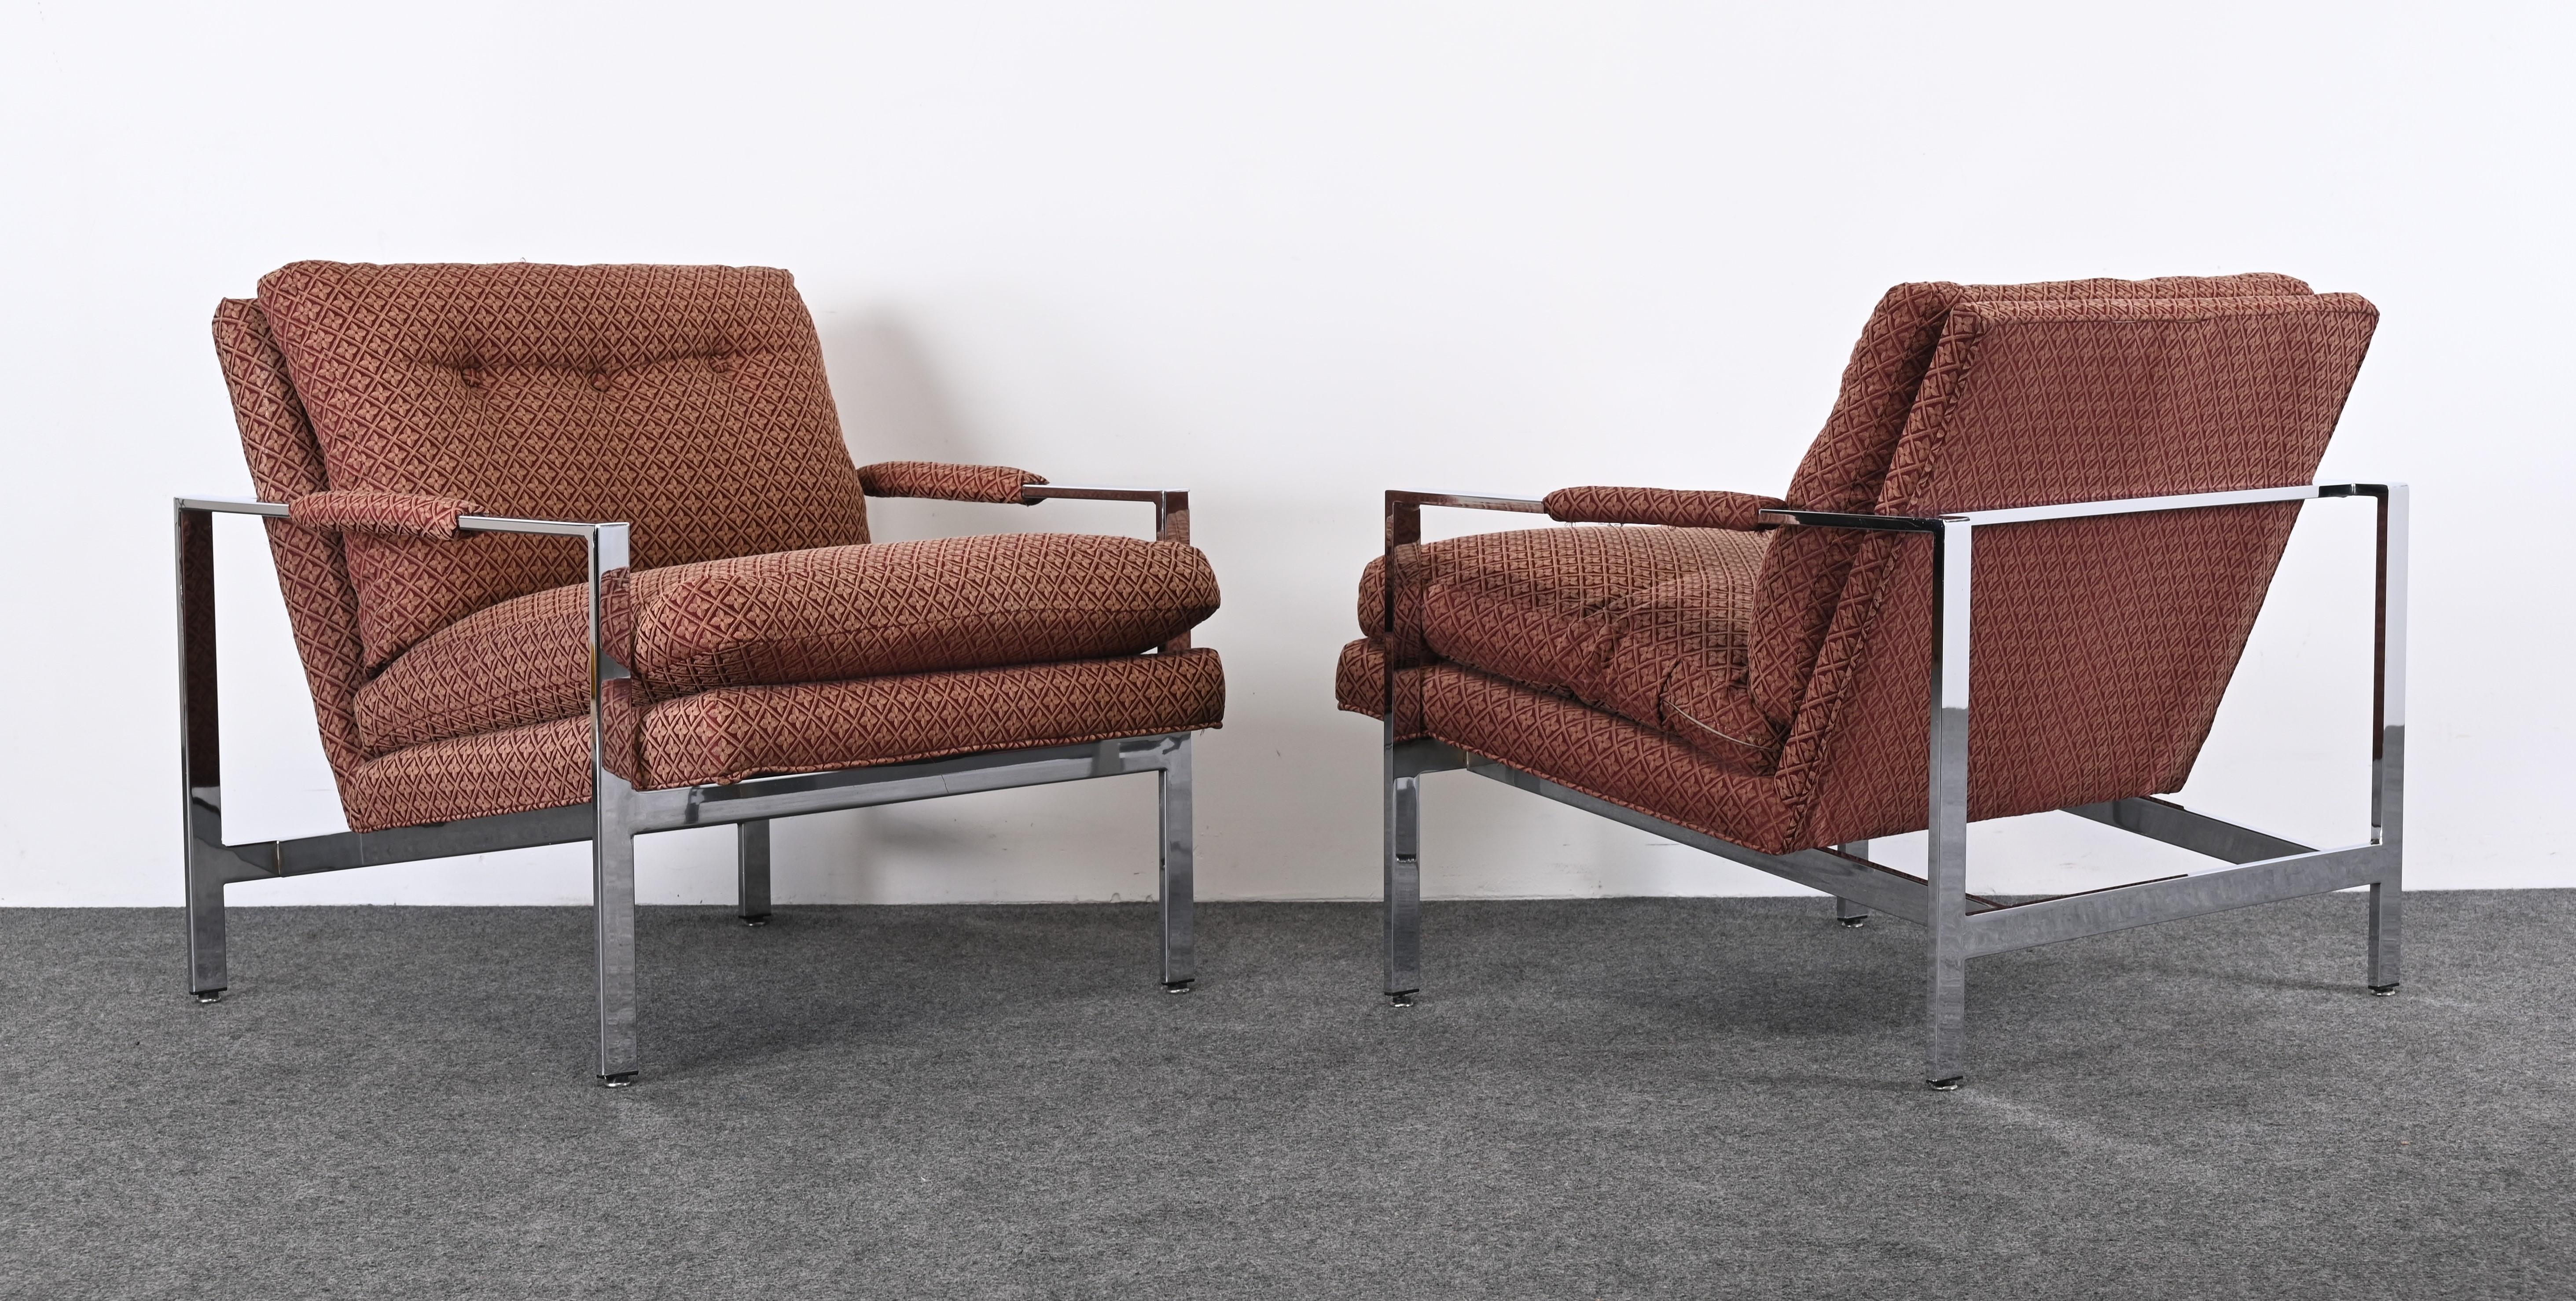 An elegant pair of flat bar chrome upholstered lounge chairs designed by Milo Baughman for Thayer Coggin. These armchairs are vintage and upholstered in the original fabric. The fabric is in good condition but you may want to reupholster. The chrome